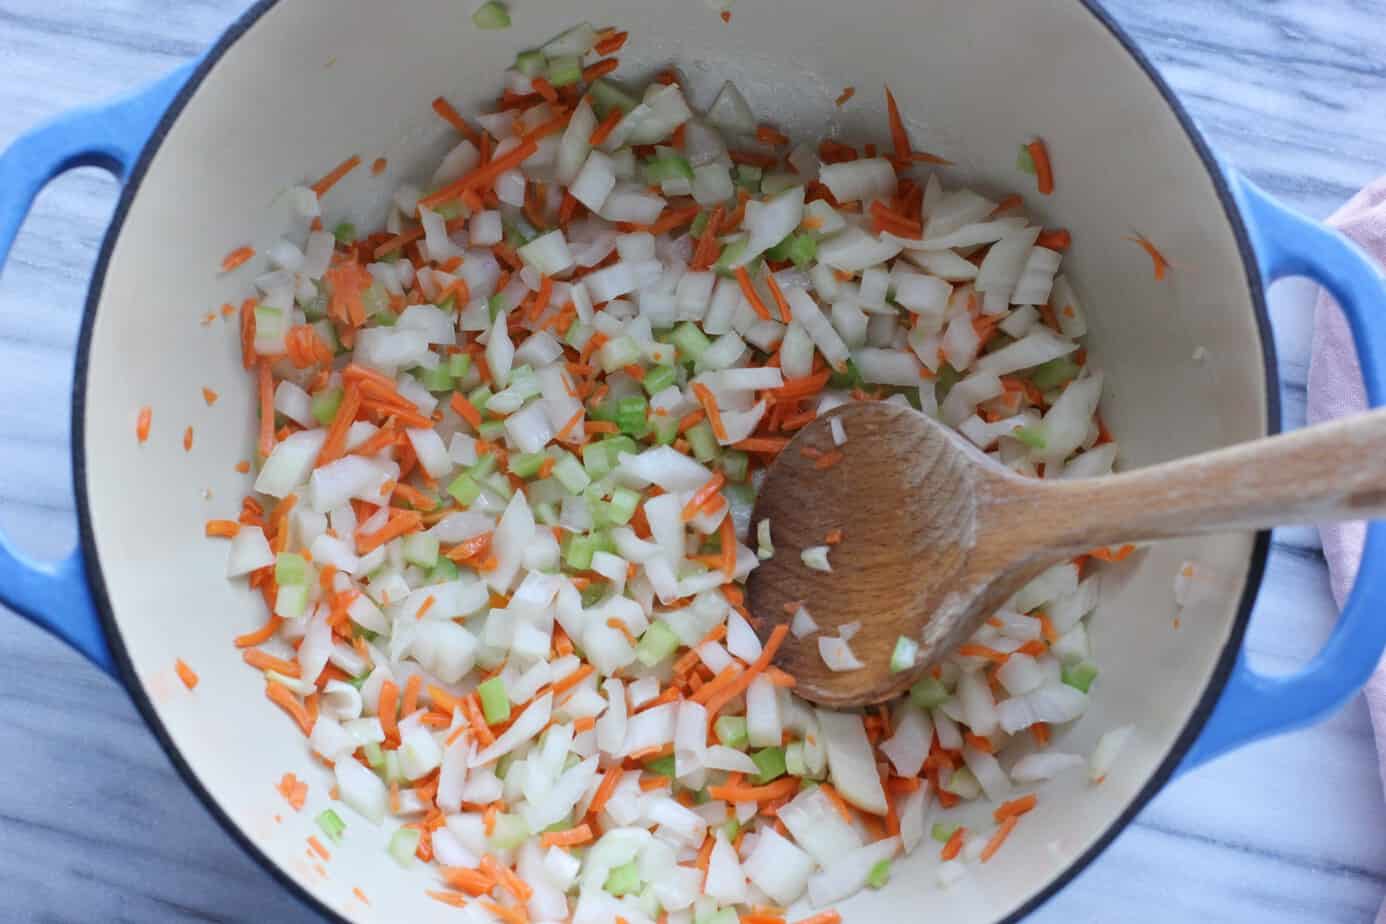 chopped celery, onion, and carrot